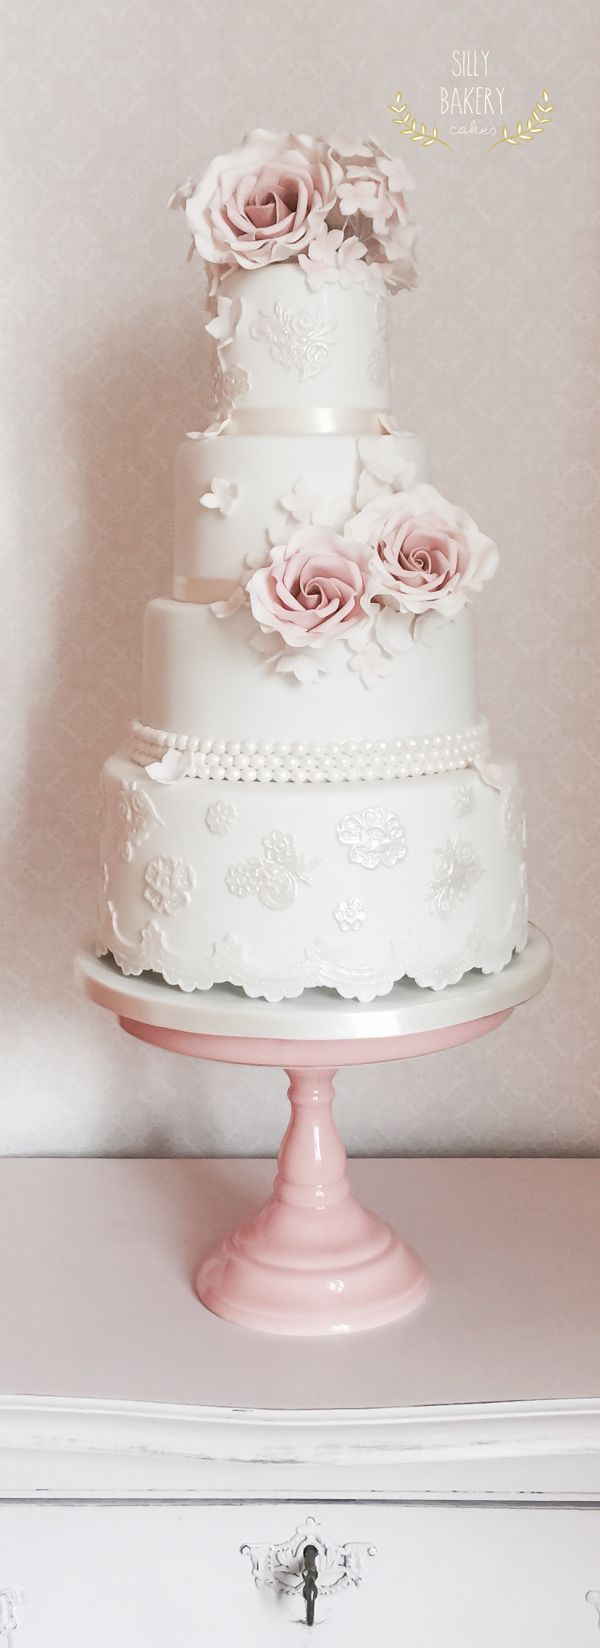 white wedding cake with sugar lace and roses